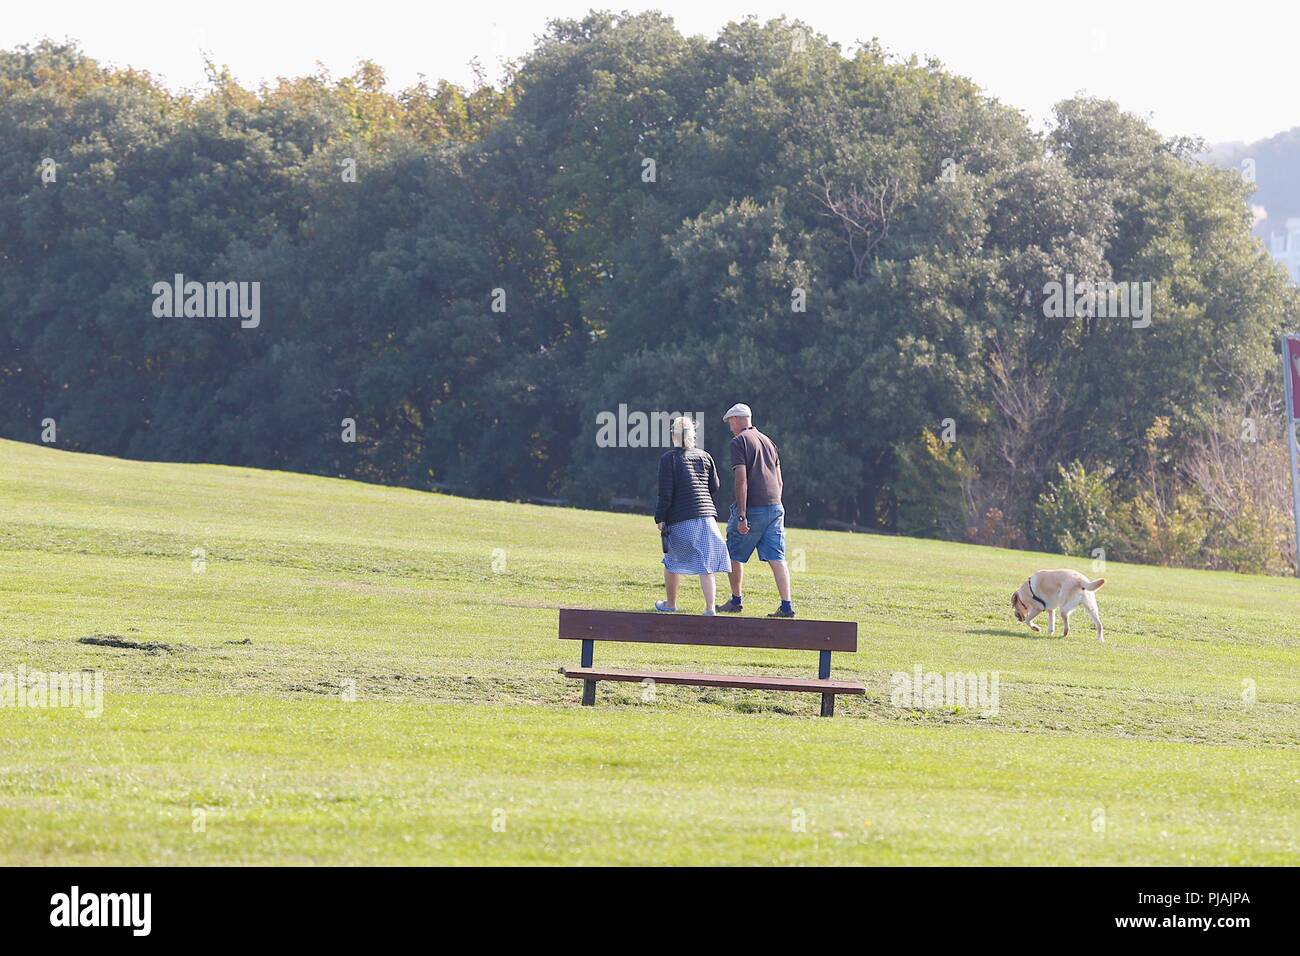 Hastings, East Sussex, UK. 6th Sep, 2018. UK Weather: A bright and sunny morning on top of West Hill in Hastings, East Sussex. An older couple walking about exercising their dog taking advantage of the warm autumnal weather. © Paul Lawrenson 2018, Photo Credit: Paul Lawrenson / Alamy Live News Stock Photo